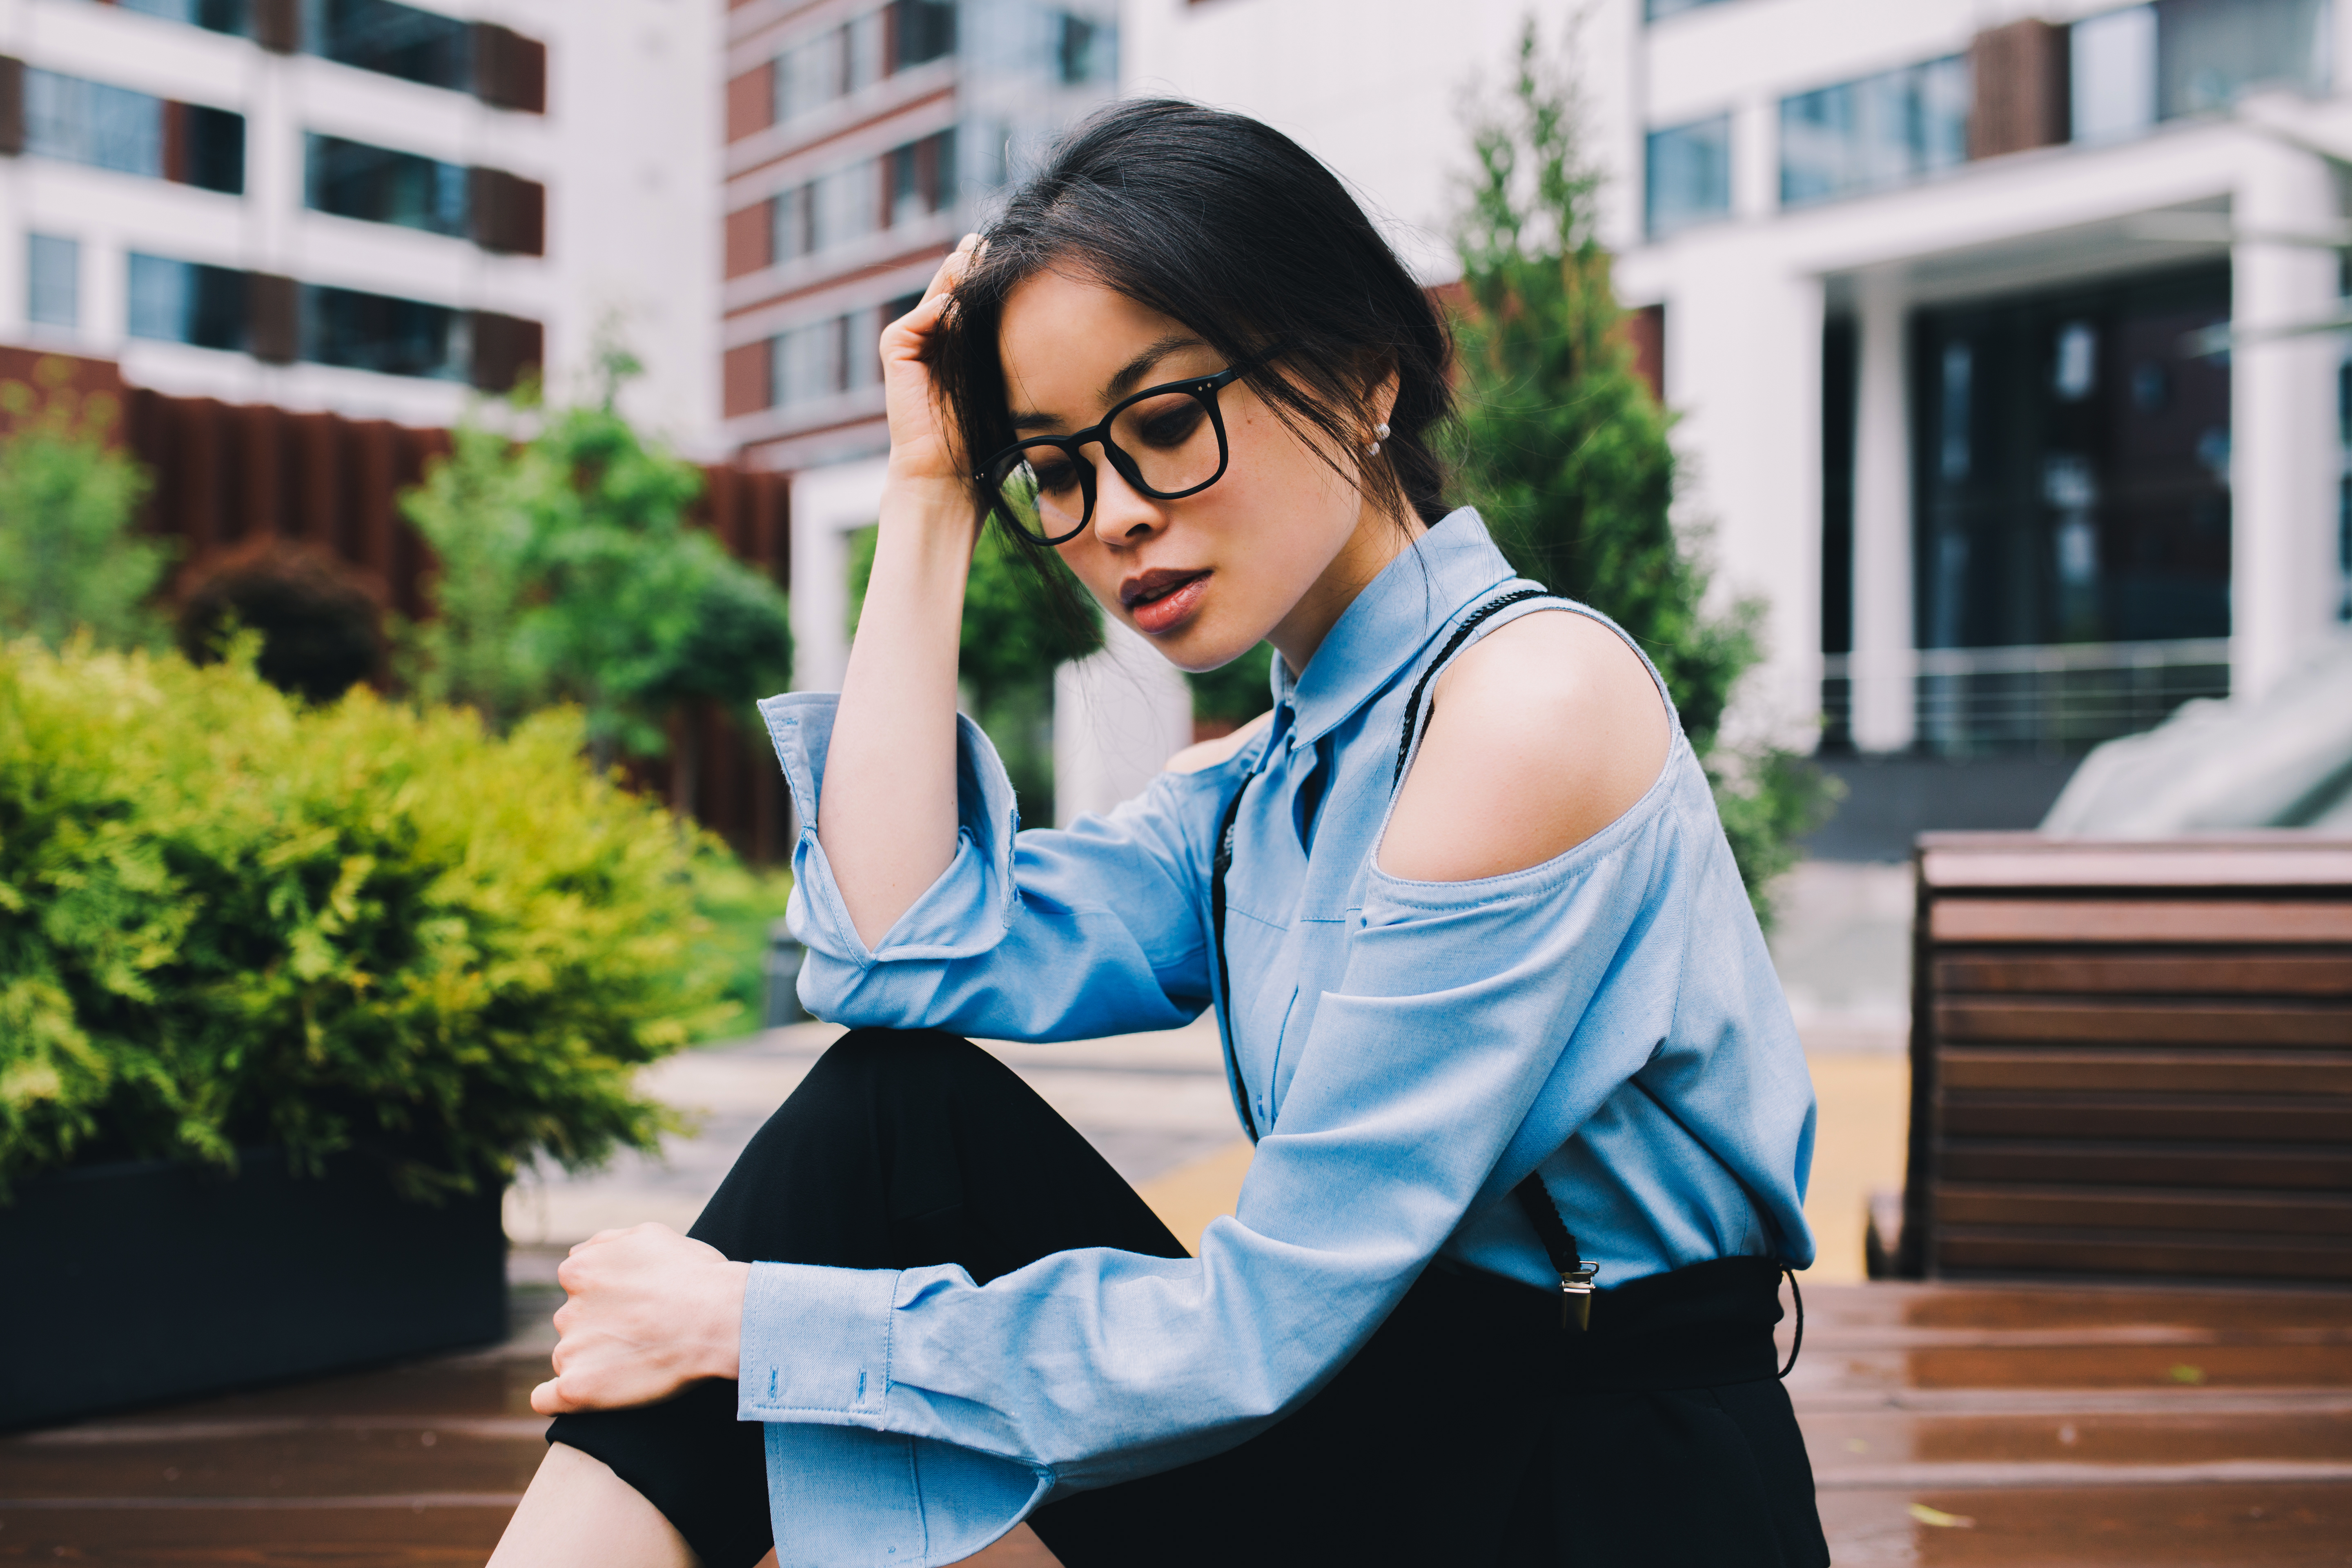 Personal photoshoot with asian girl in the city of London